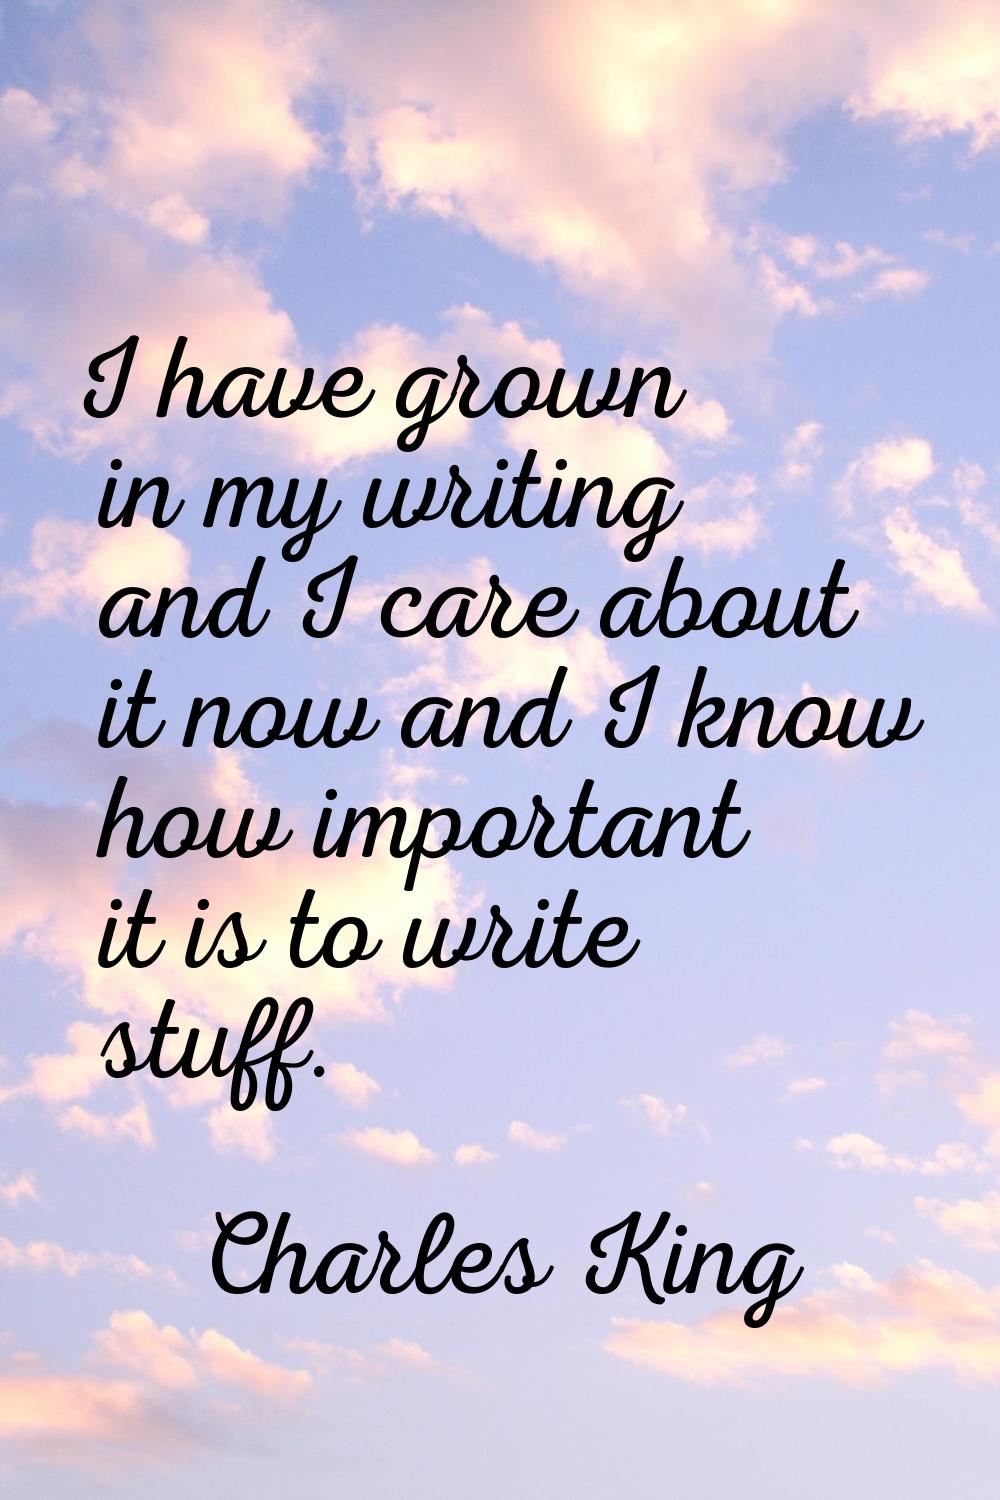 I have grown in my writing and I care about it now and I know how important it is to write stuff.